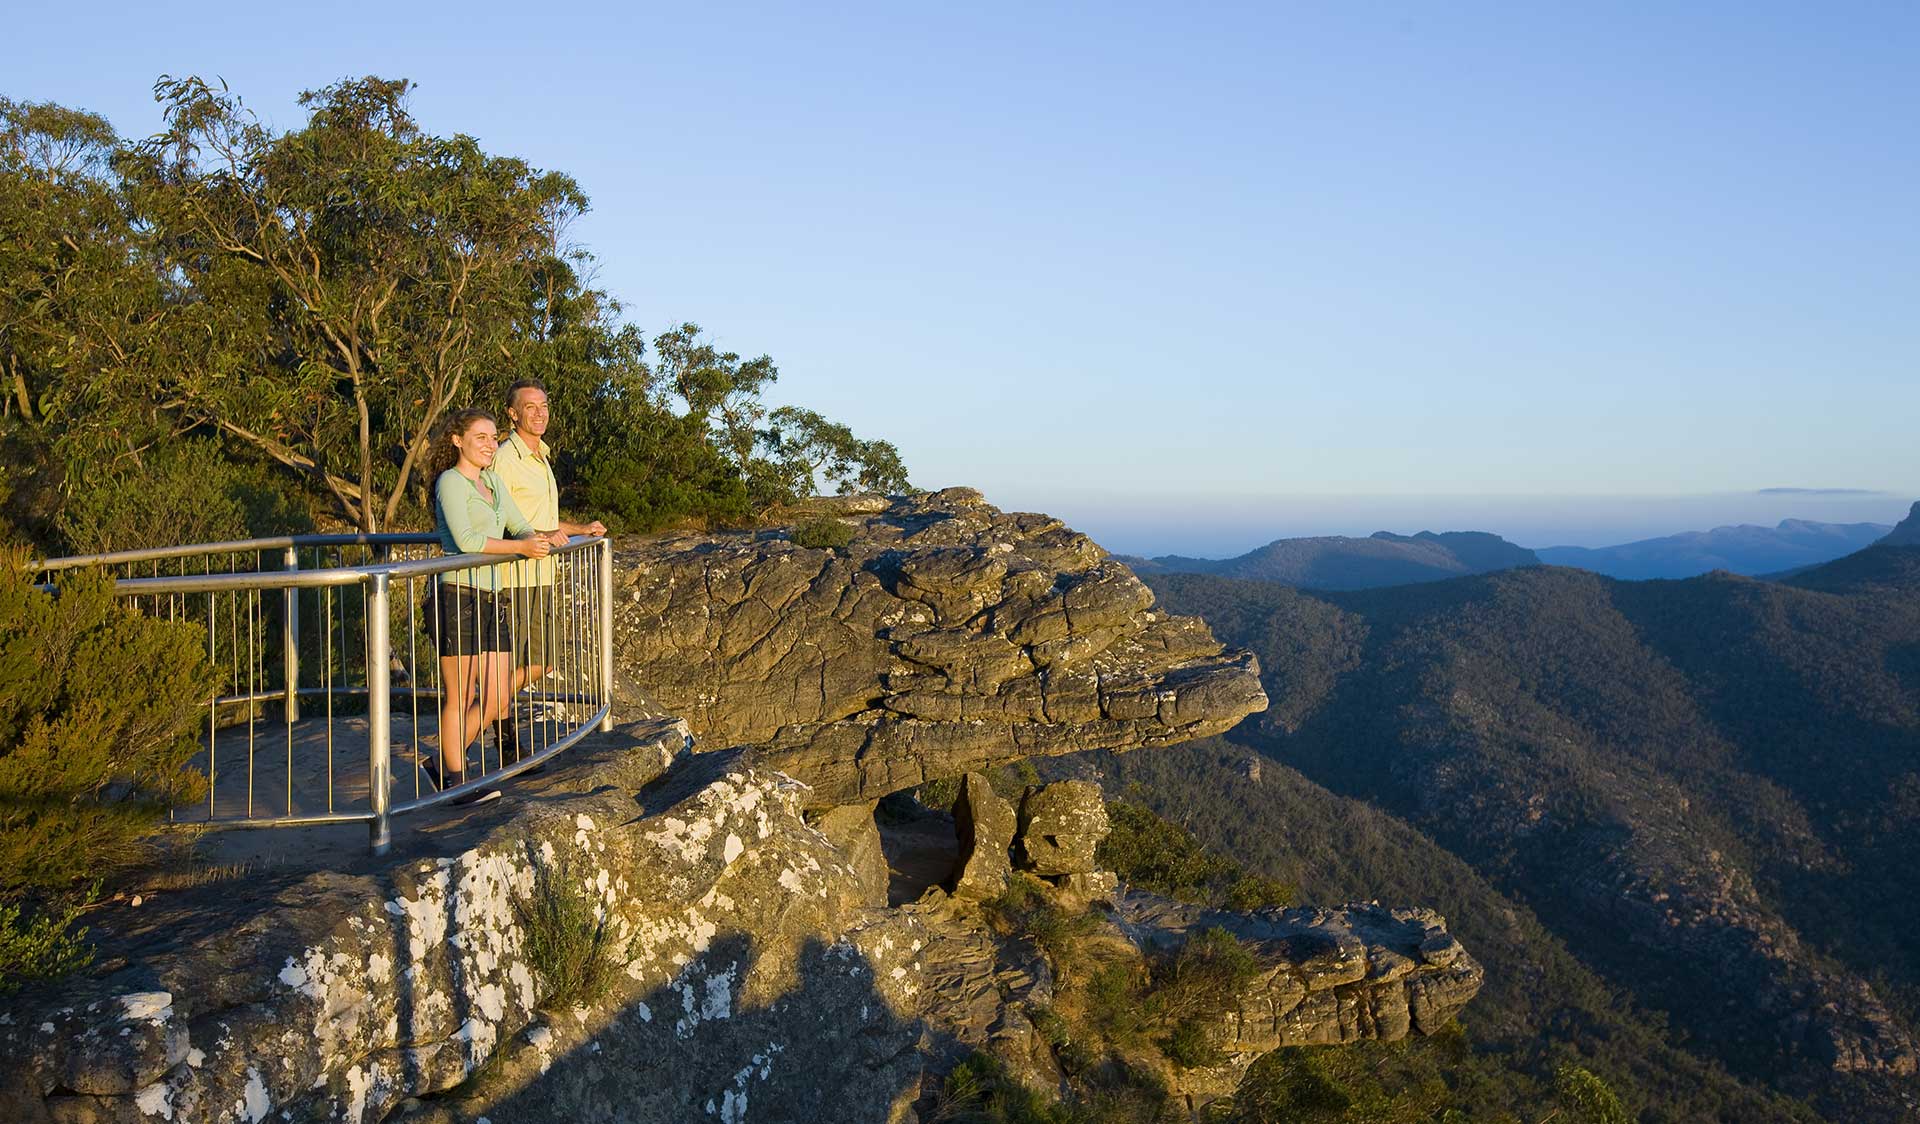 A couple take in the views from Reeds Lookout